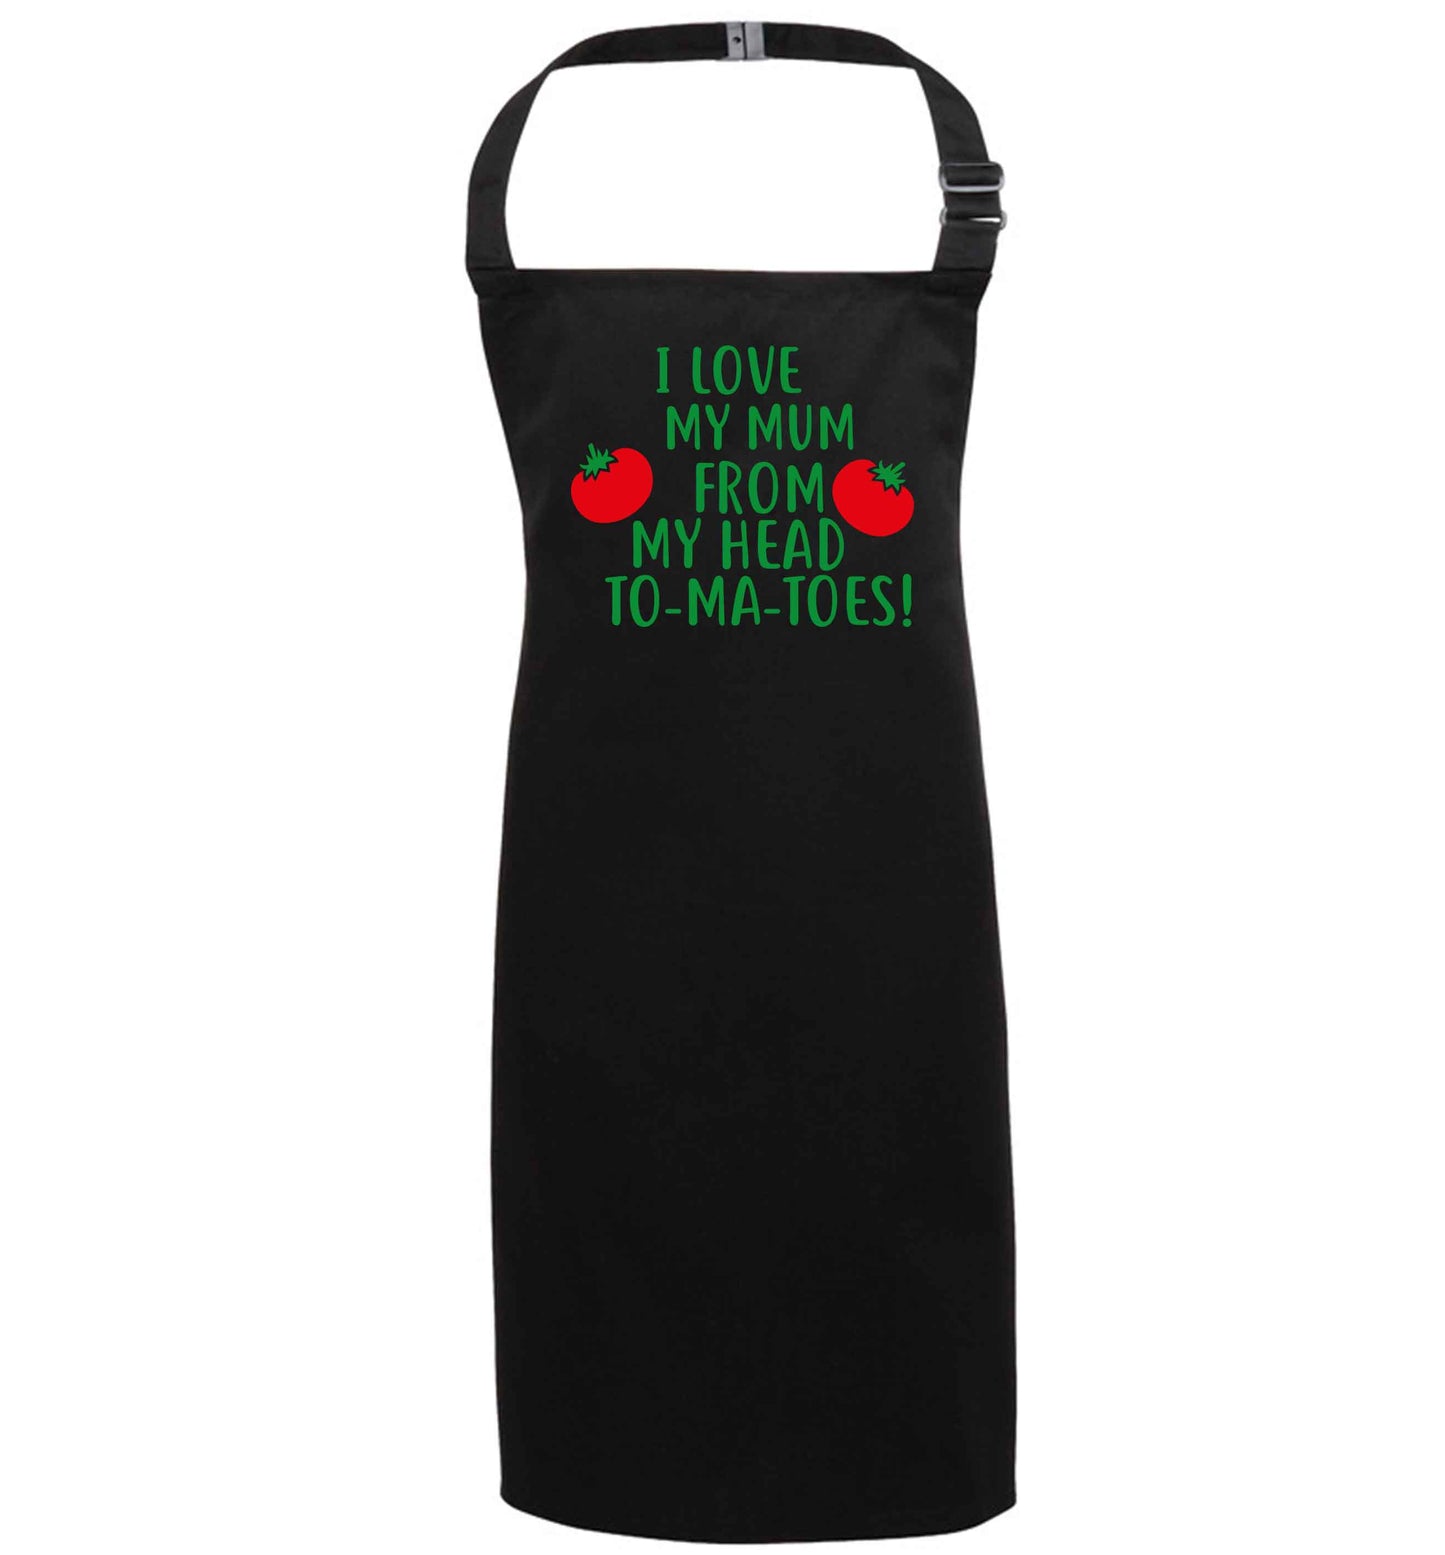 I love my mum from my head to-my-toes! black apron 7-10 years